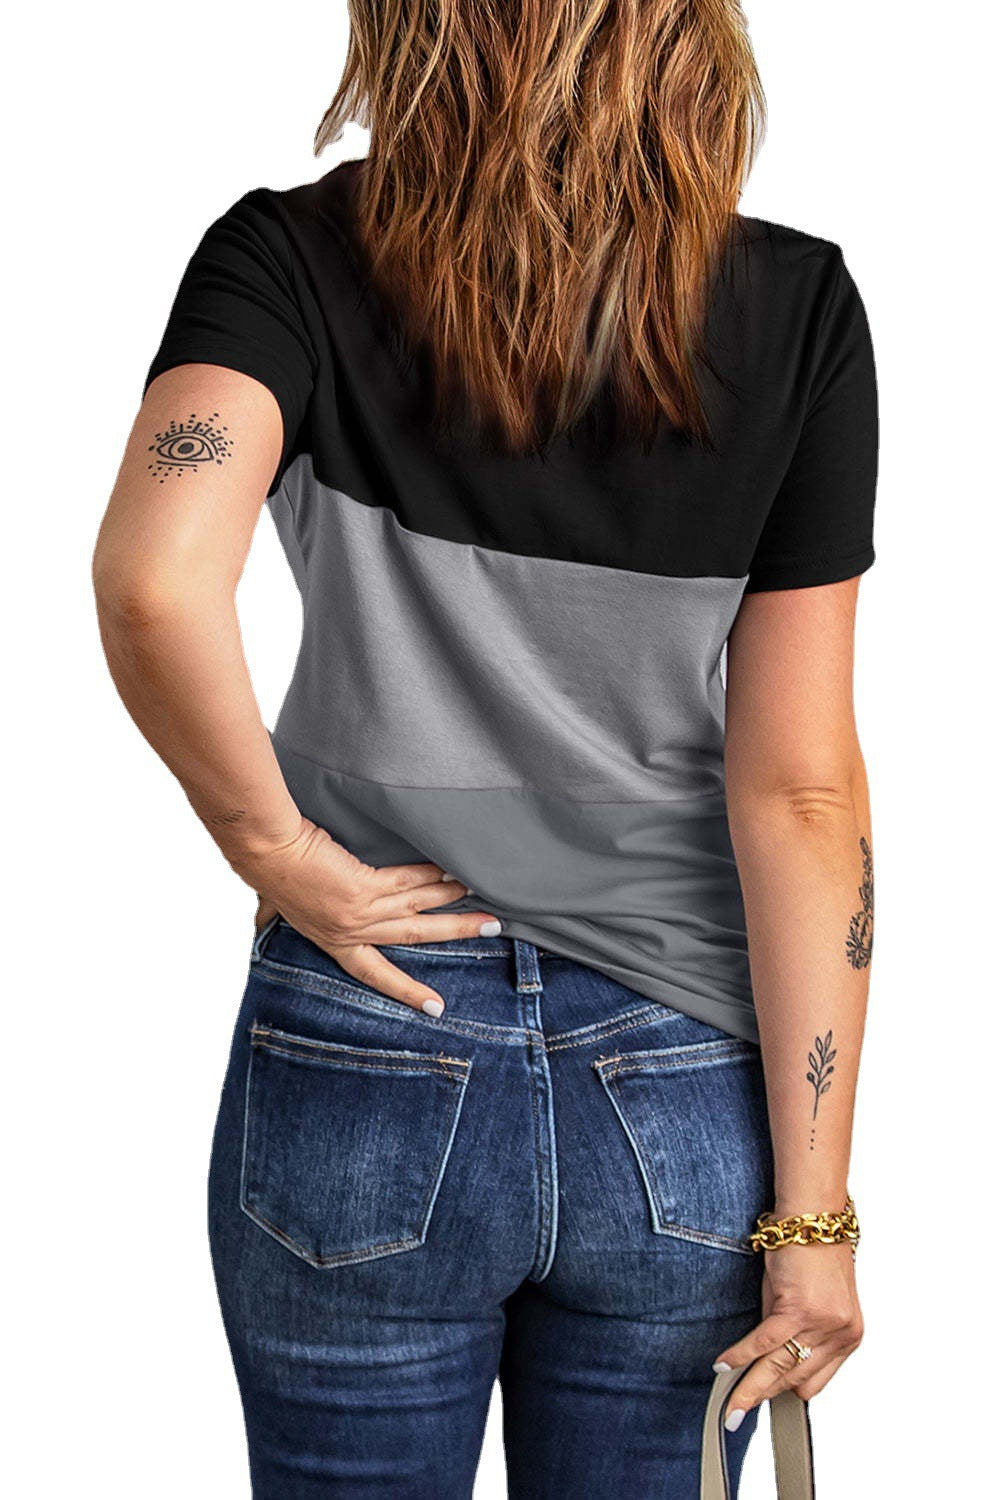 Women's Color Matching Short-sleeved T-shirt Loose Tops